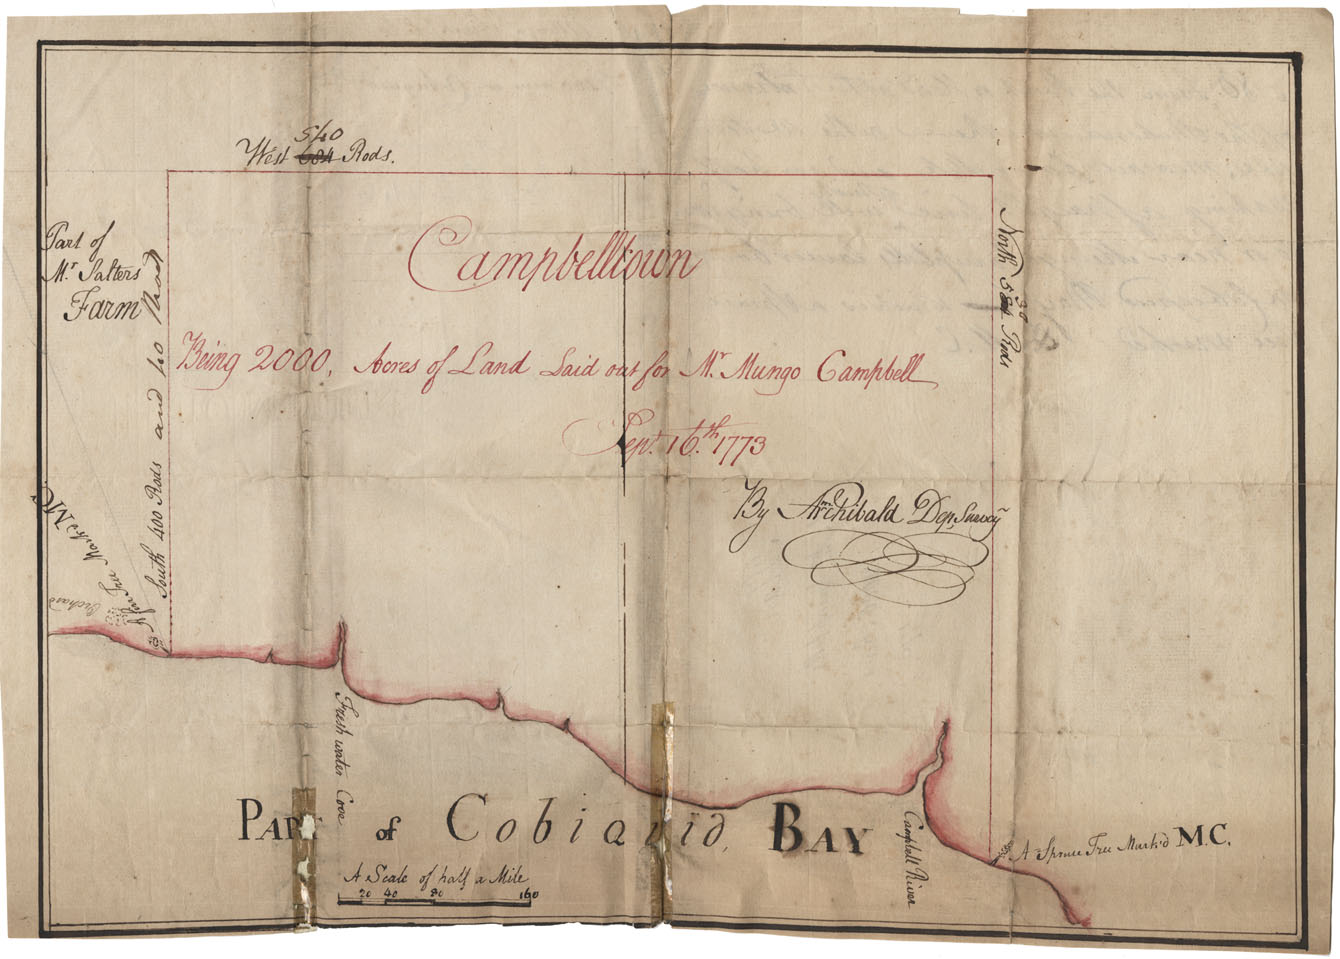 Plan of 2000 acrea of land laid out for Mrs. Mungo Campbell on Cobequid Bay